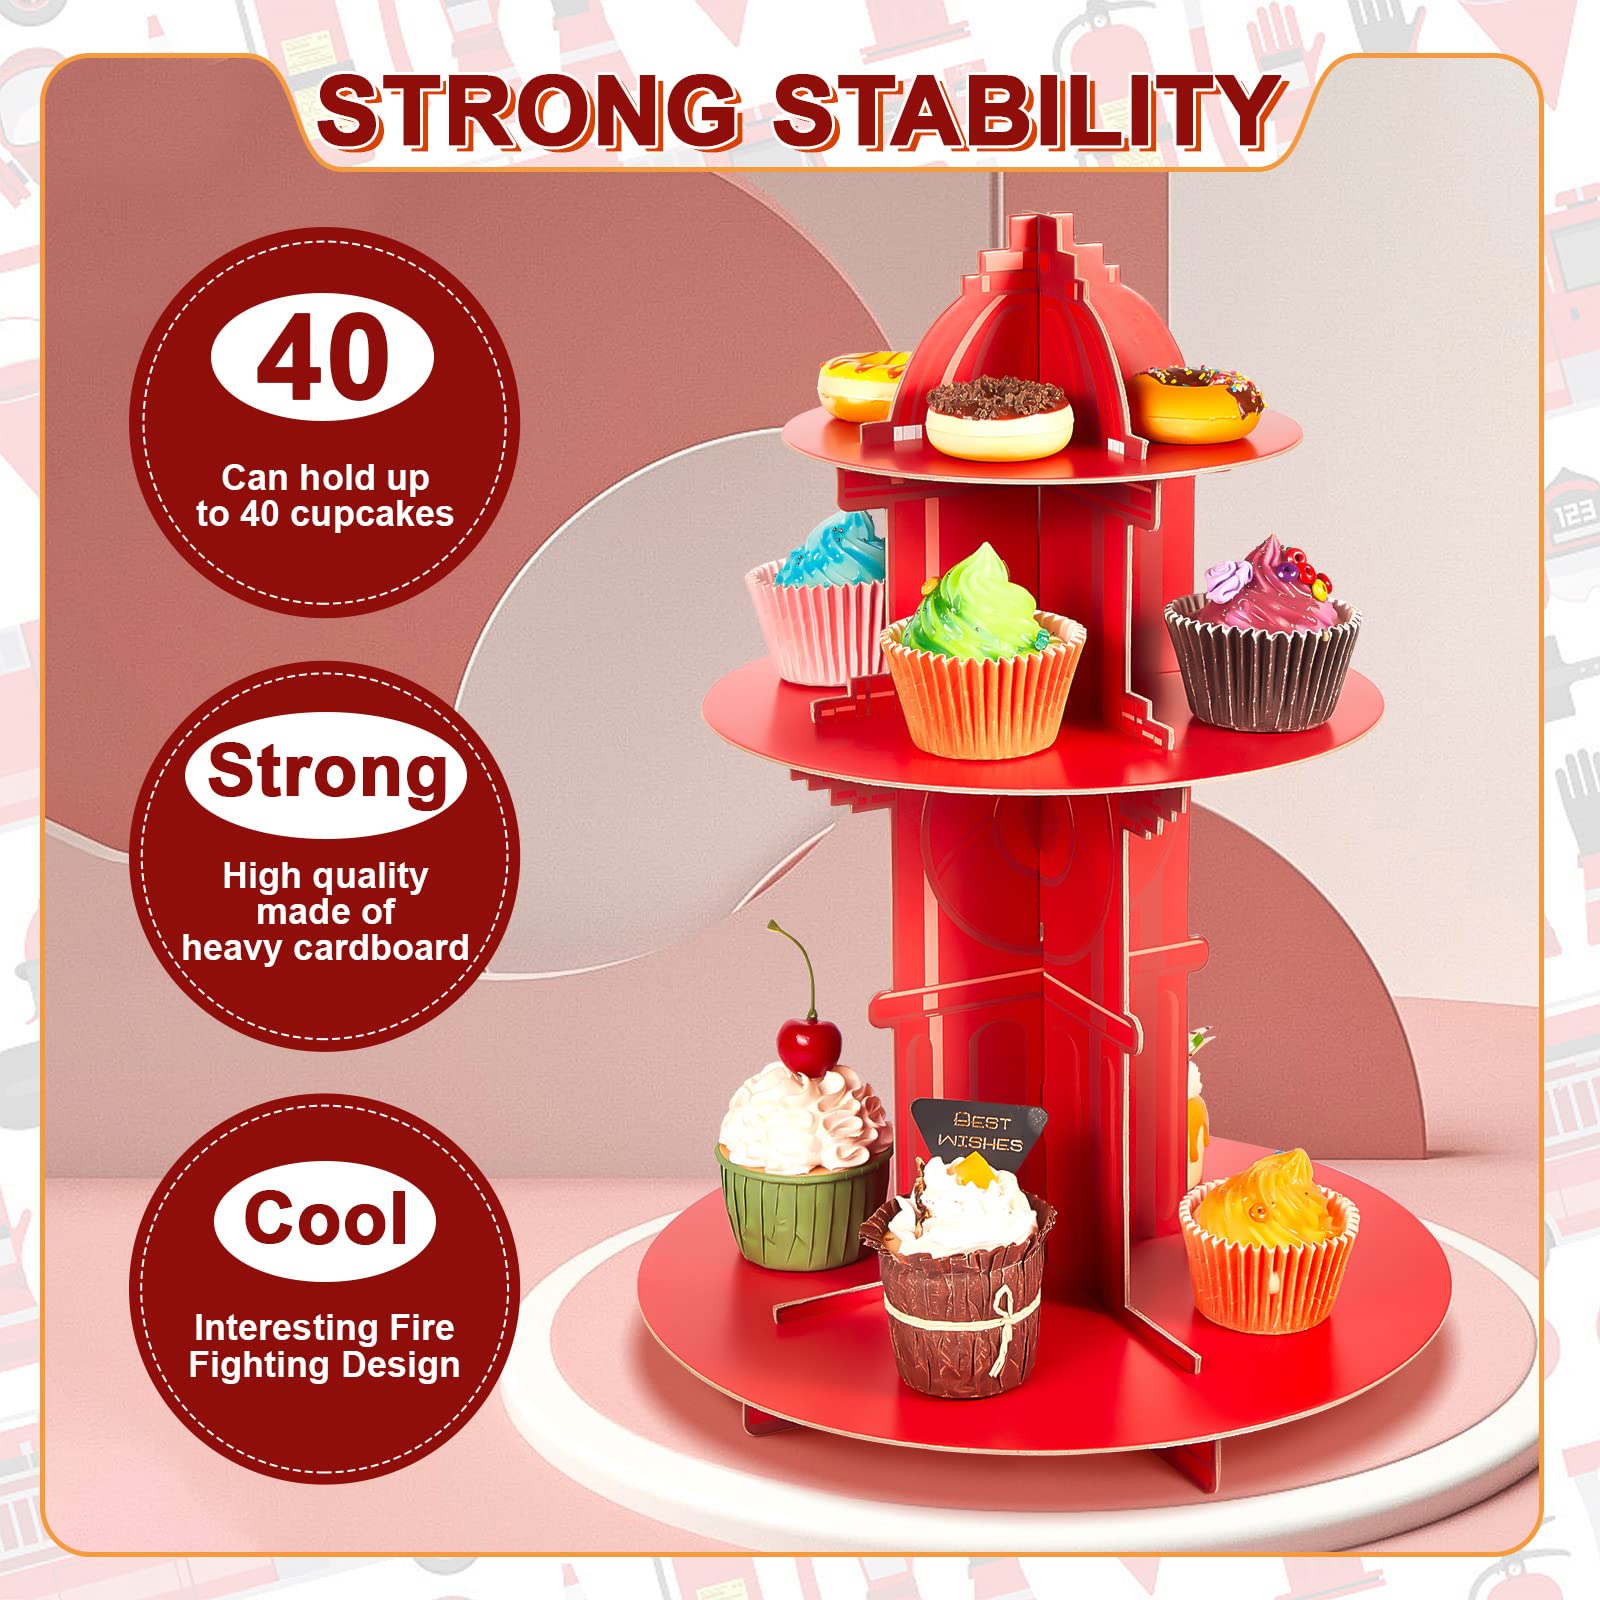 Fire Hydrant Cupcake Holder 2 Pieces 3 Tier Fire Hydrant Cupcake Stand Fire Fighter Theme Cupcake Holder Stand Fire Truck Birthday Party Supplies Fire Hydrant Party Decor for Fire Party Decorations